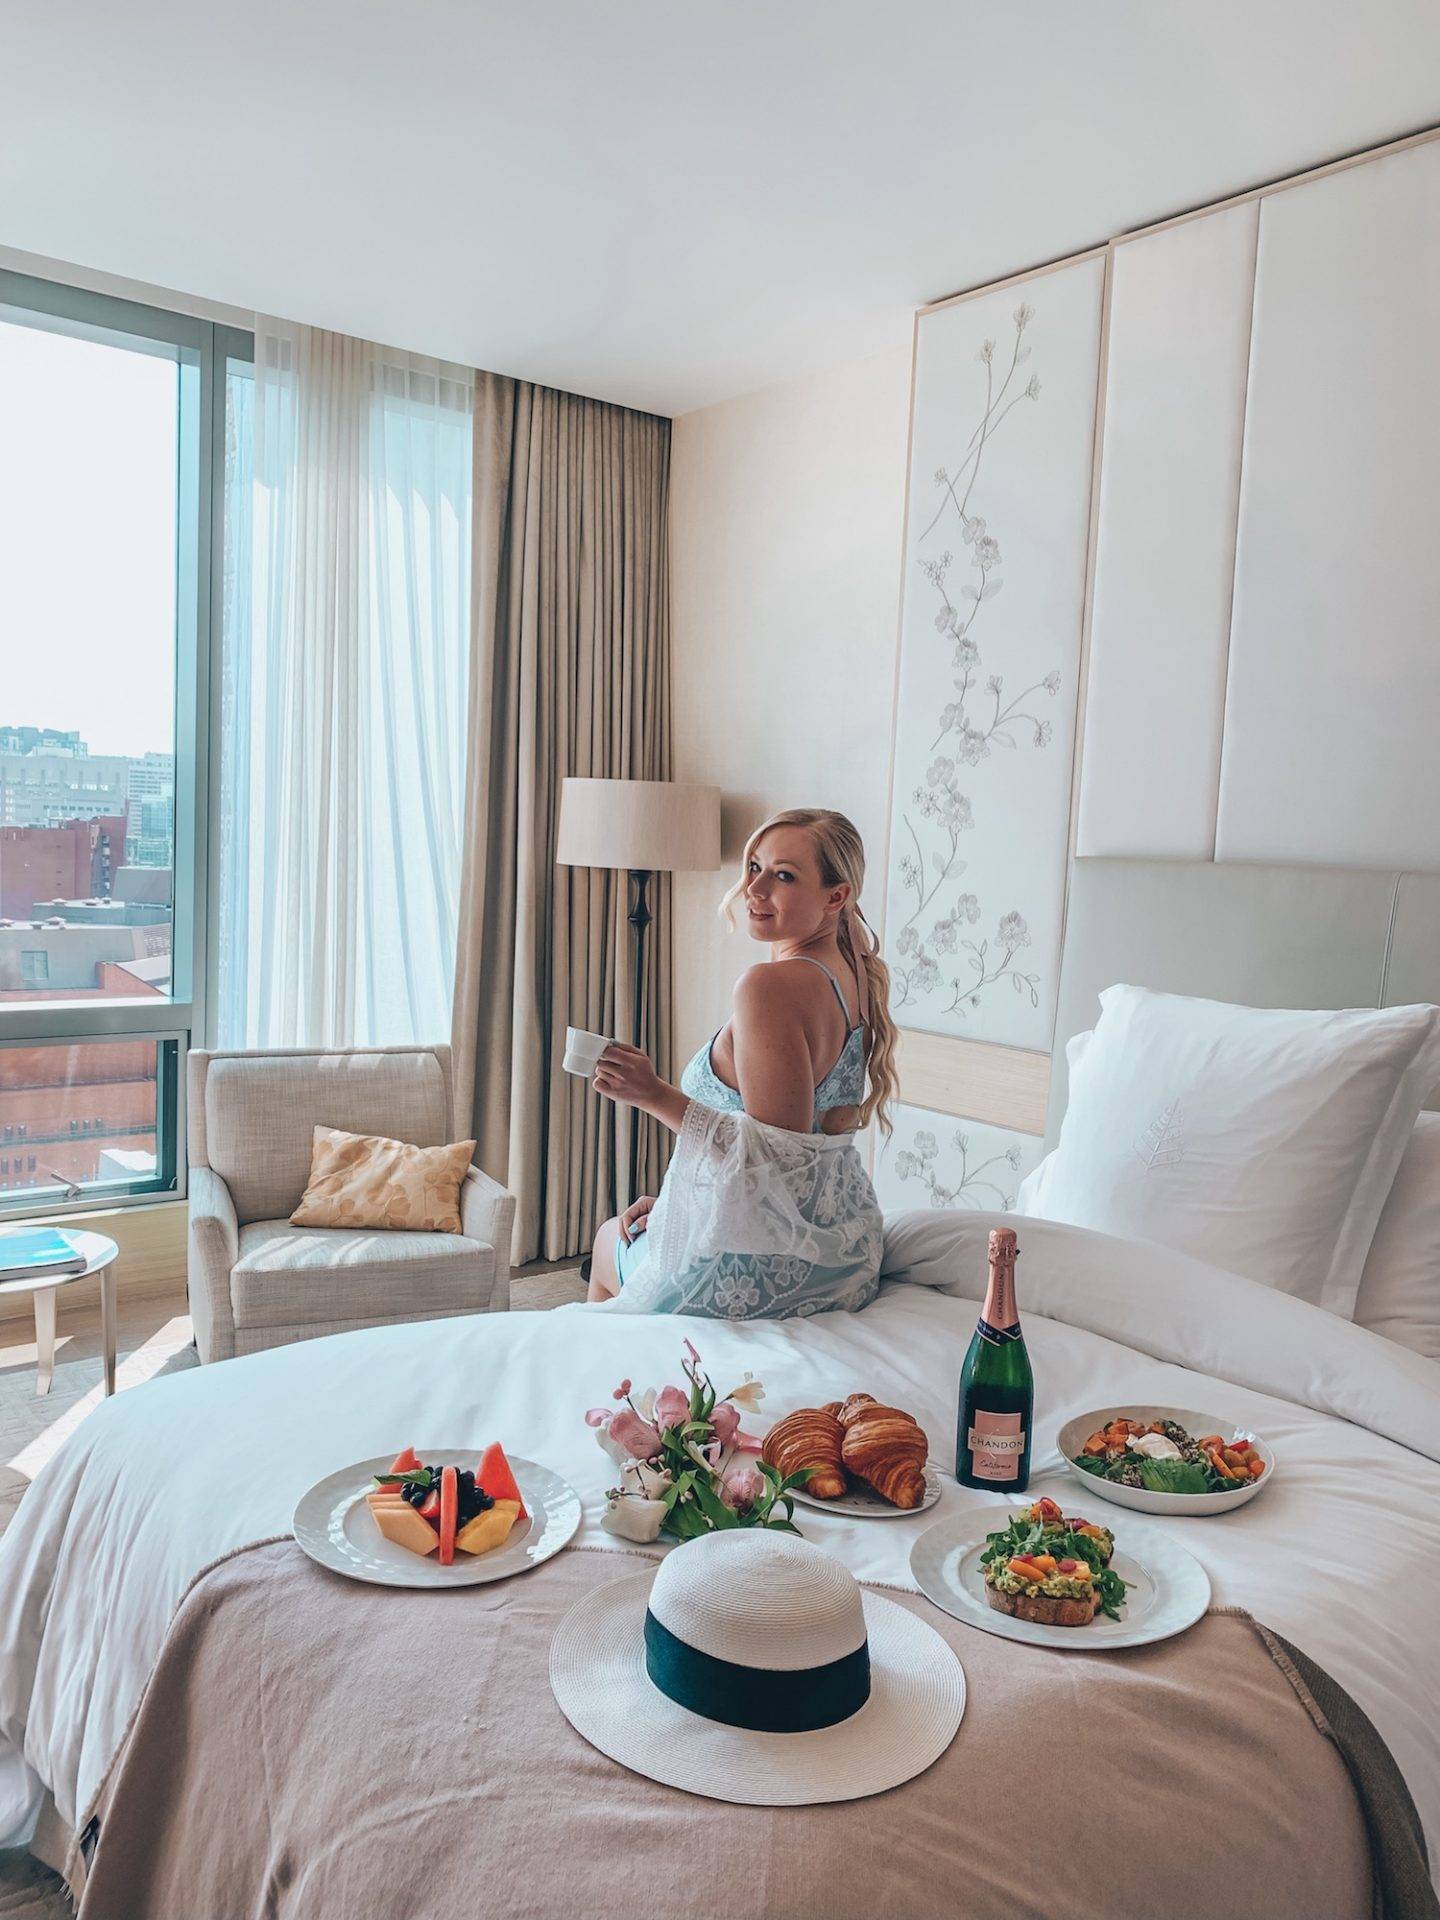 Four Seasons Toronto has impeccable room service and the comfiest beds. Click to read the rest of the review and 18 reasons you'll love staying at this hotel!